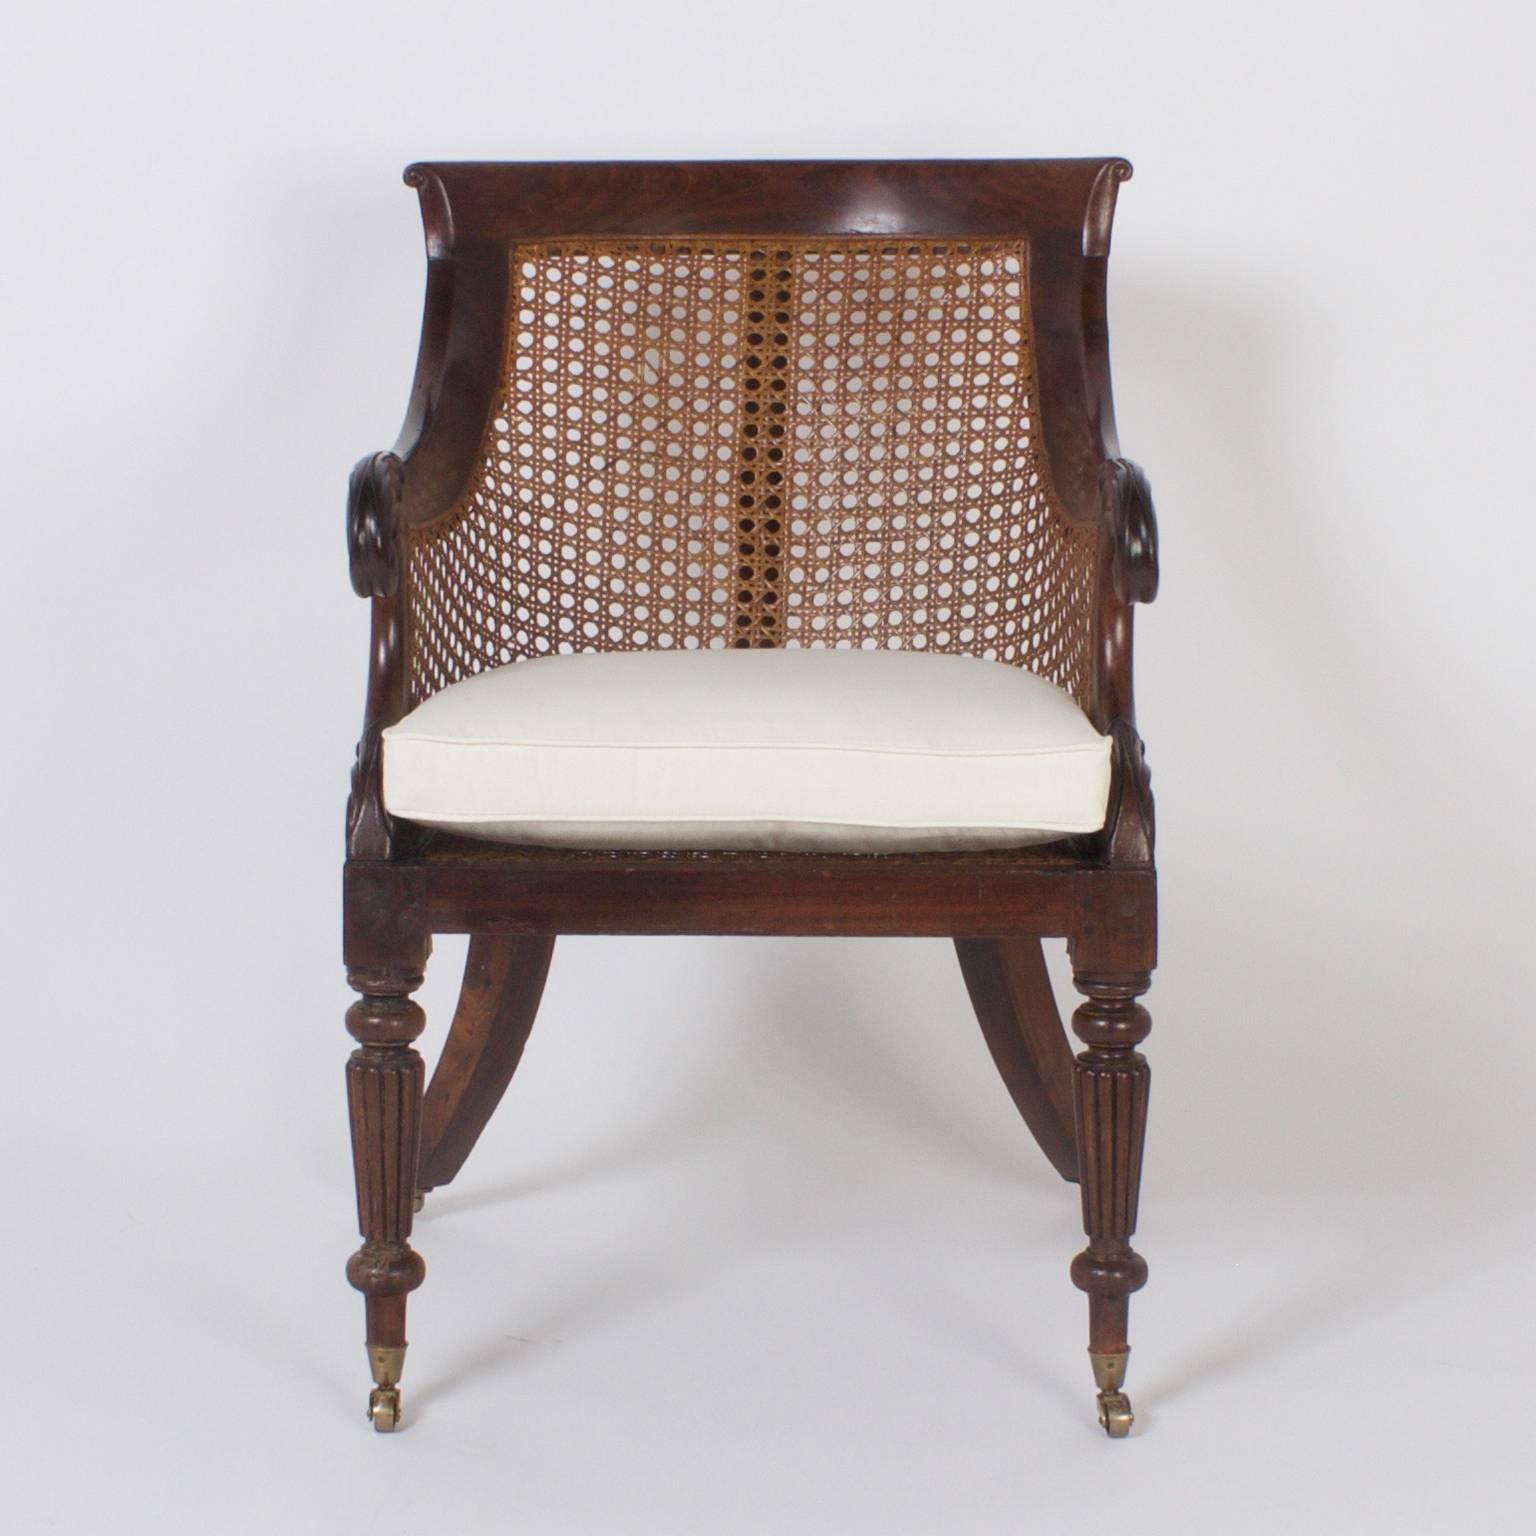 Rare pair of Regency style English library chairs crafted in mahogany and hand caned. These armchairs have a relaxed yet sophisticated design with carved acanthus arms, rounded backs, turned and reeded front legs and splayed back legs all set on